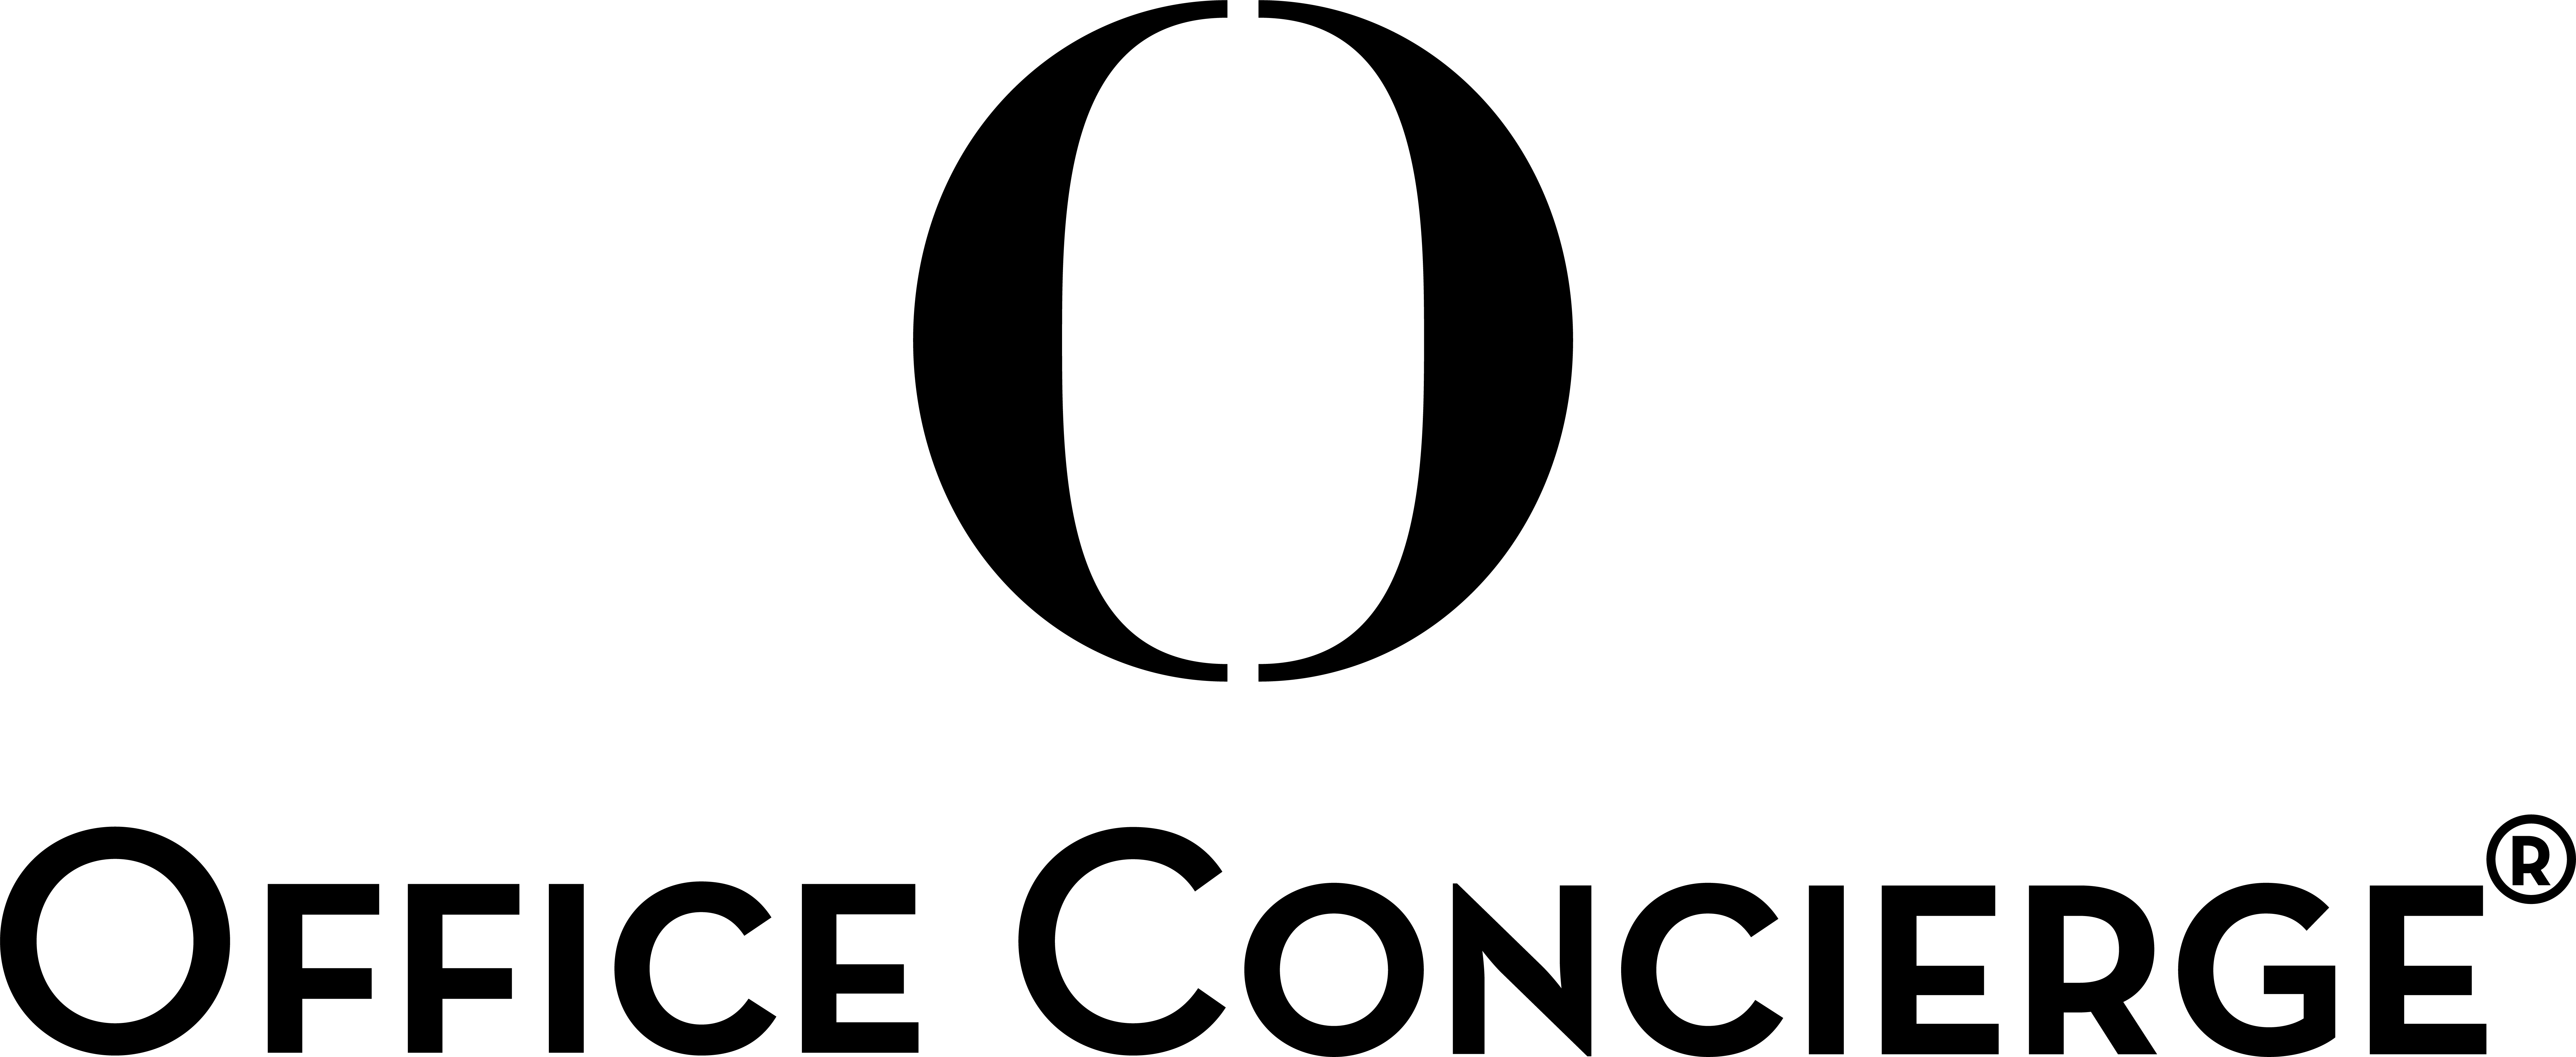 Working for Office Concierge | Office Concierge Career | Monster